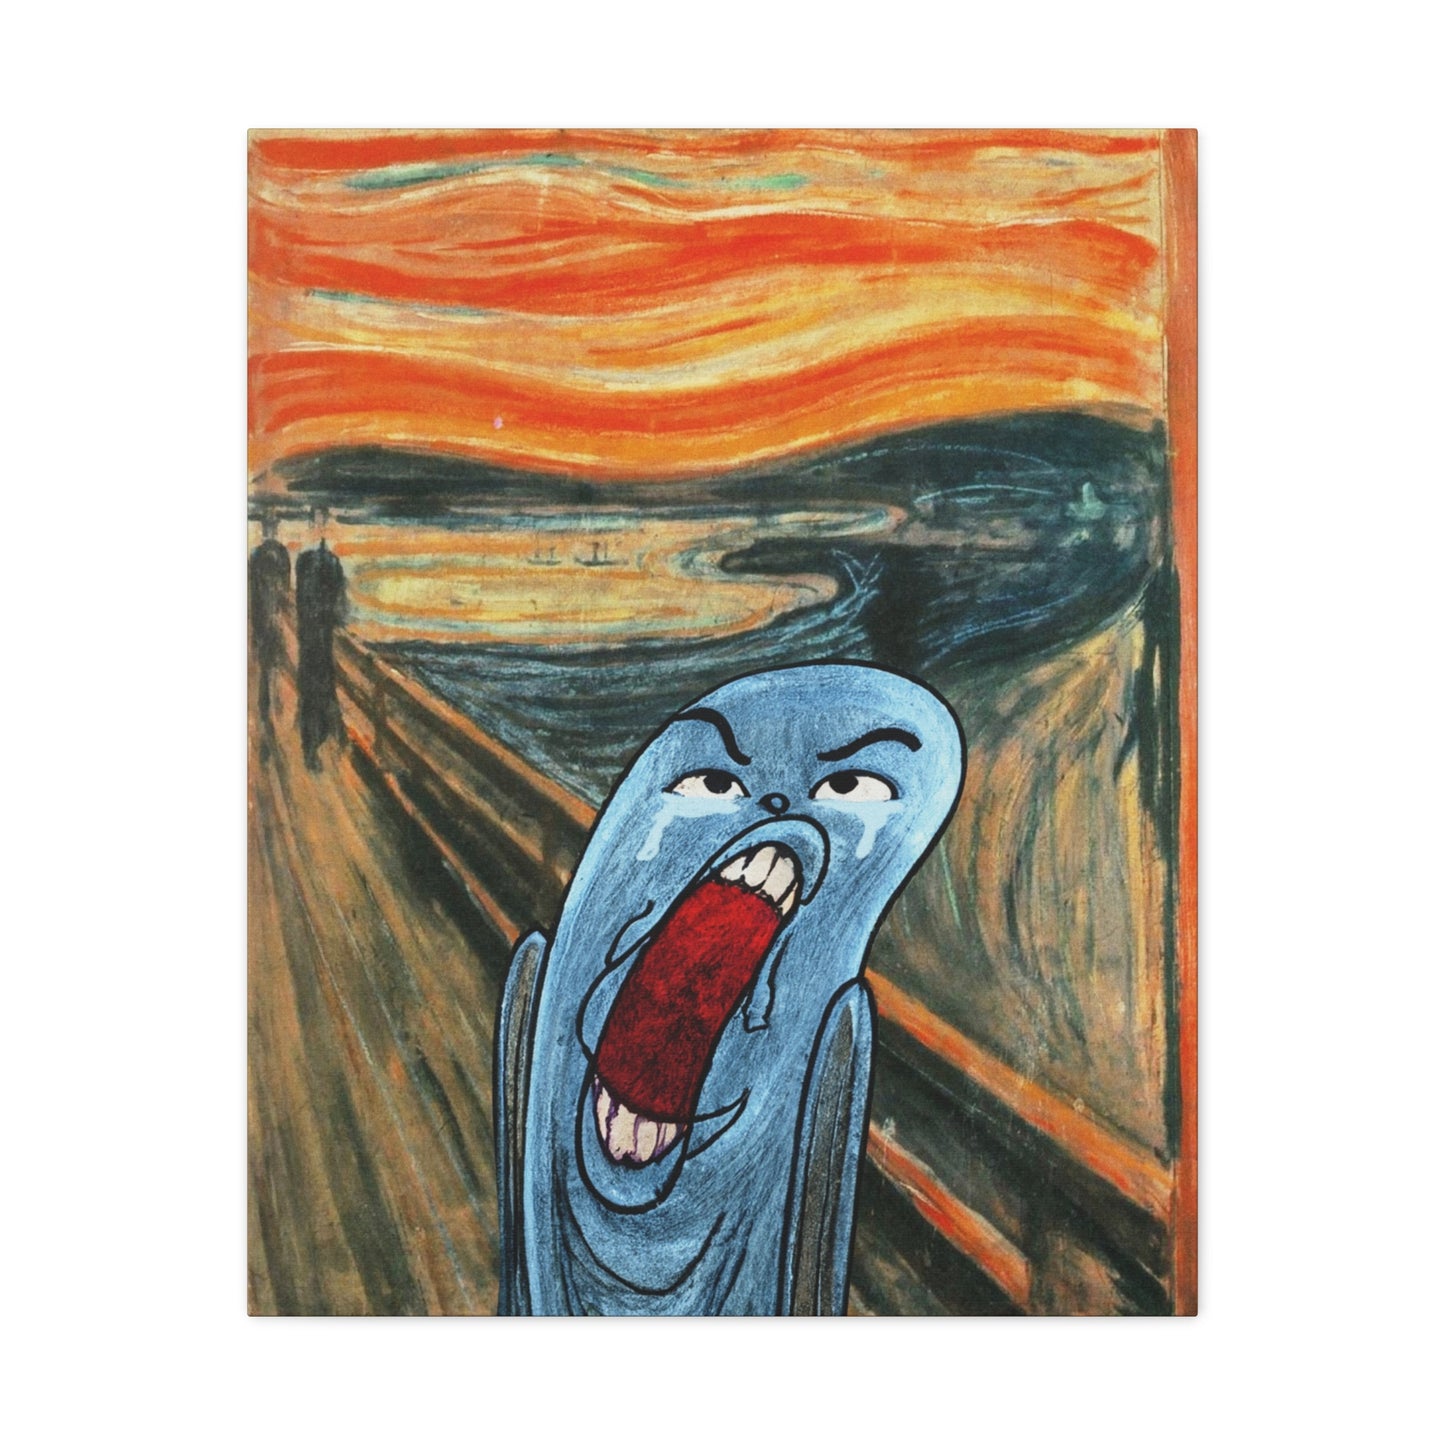 The Ugly Smell Scream canvas print